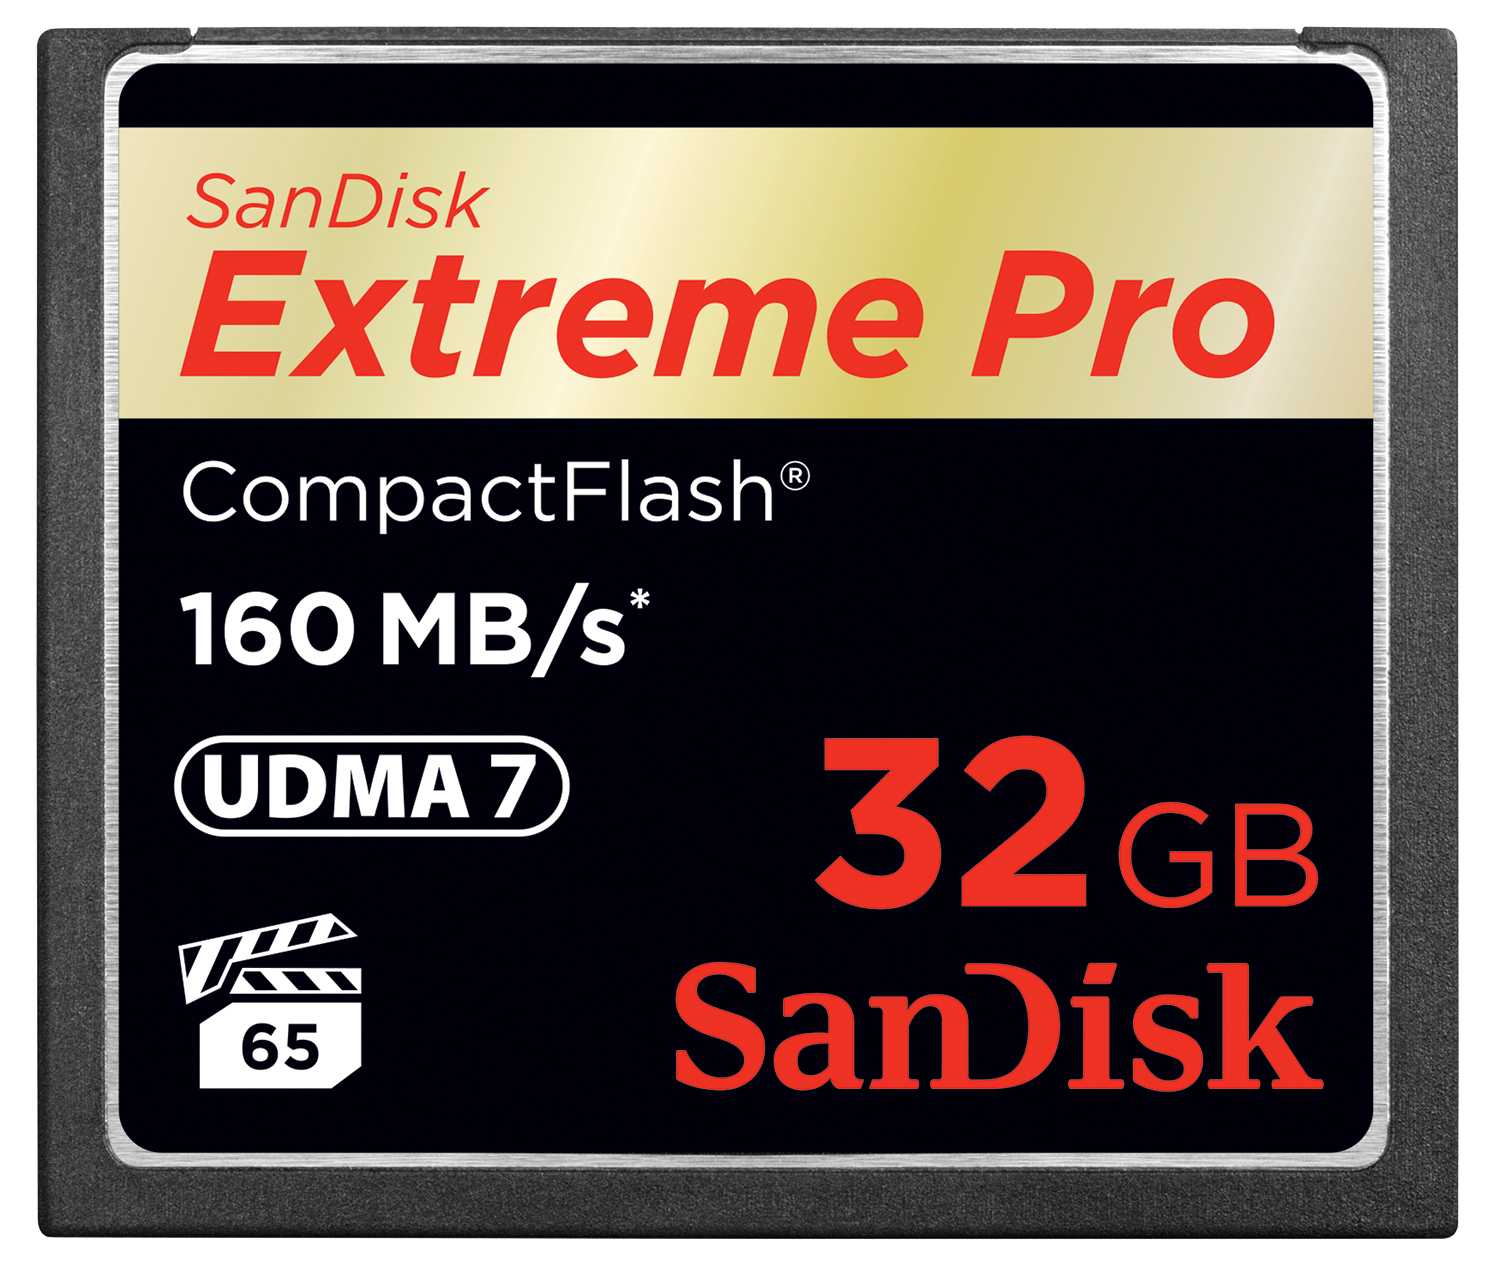 Sandisk Extreme Pro compact flash card 